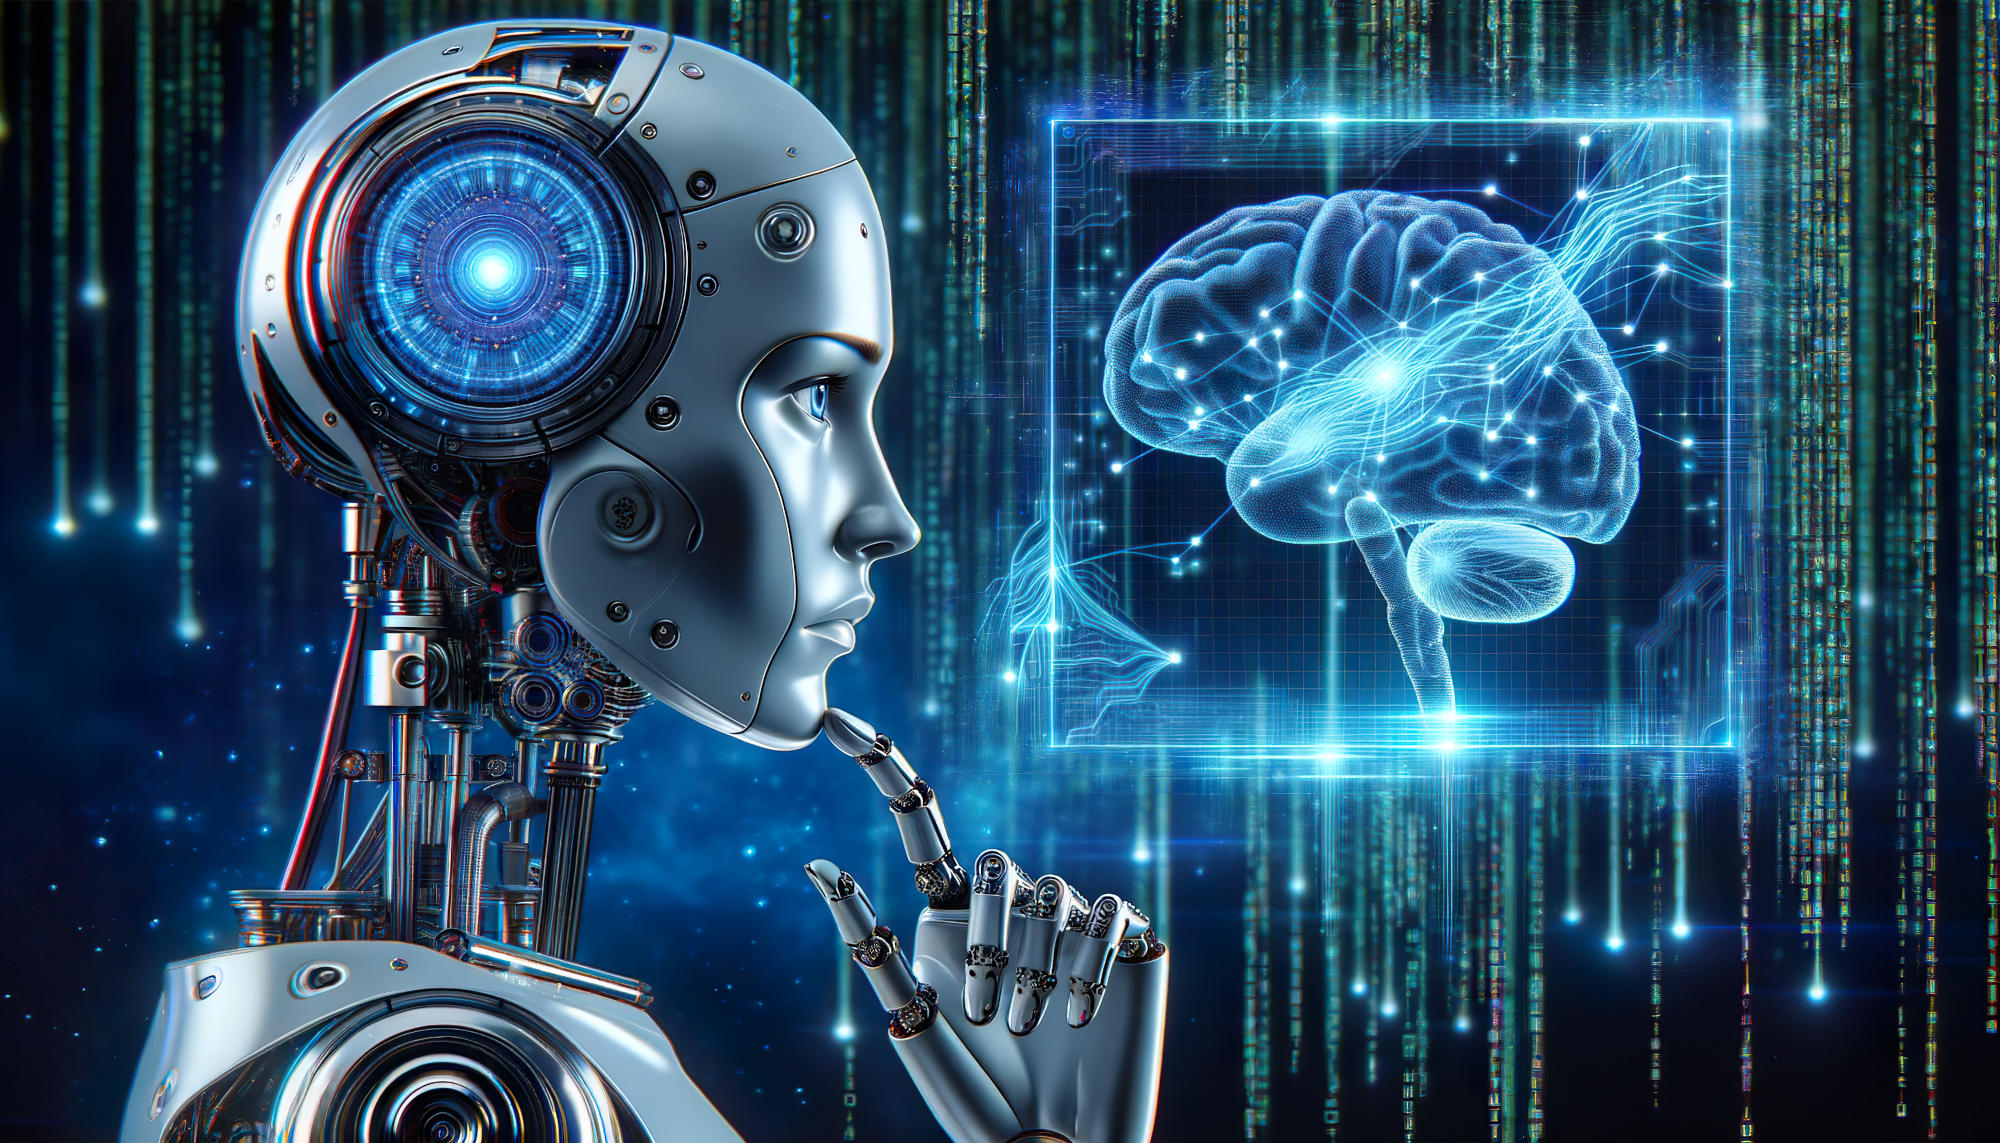 Will Artificial Intelligence Soon Become Conscious?